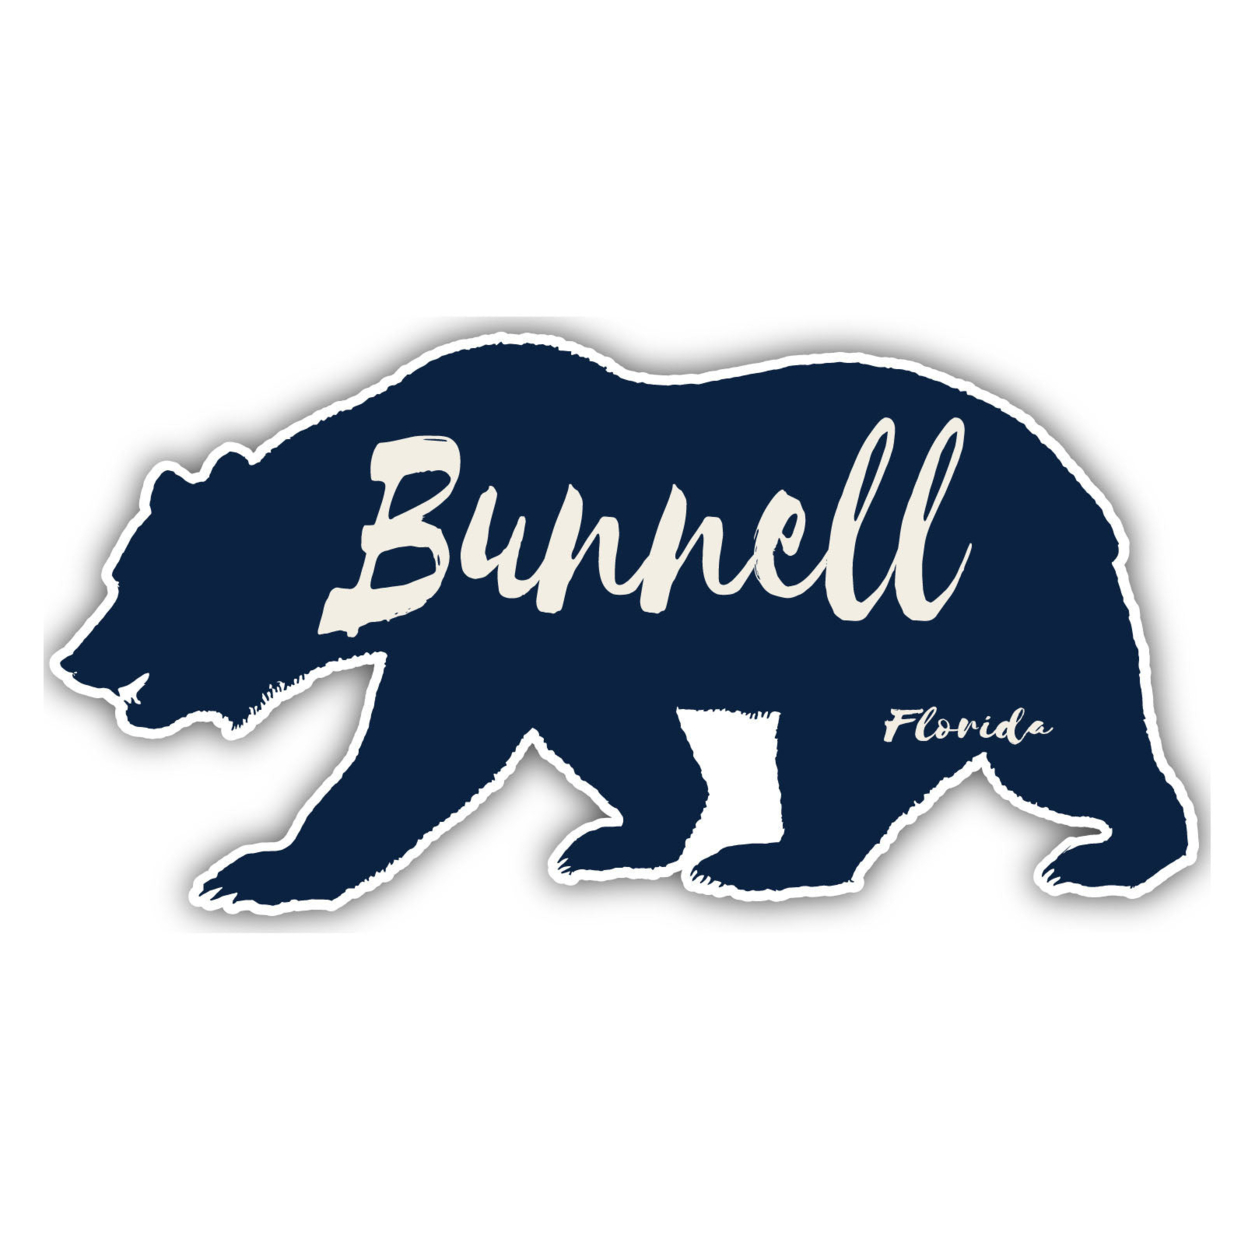 Bunnell Florida Souvenir Decorative Stickers (Choose Theme And Size) - 4-Pack, 4-Inch, Bear